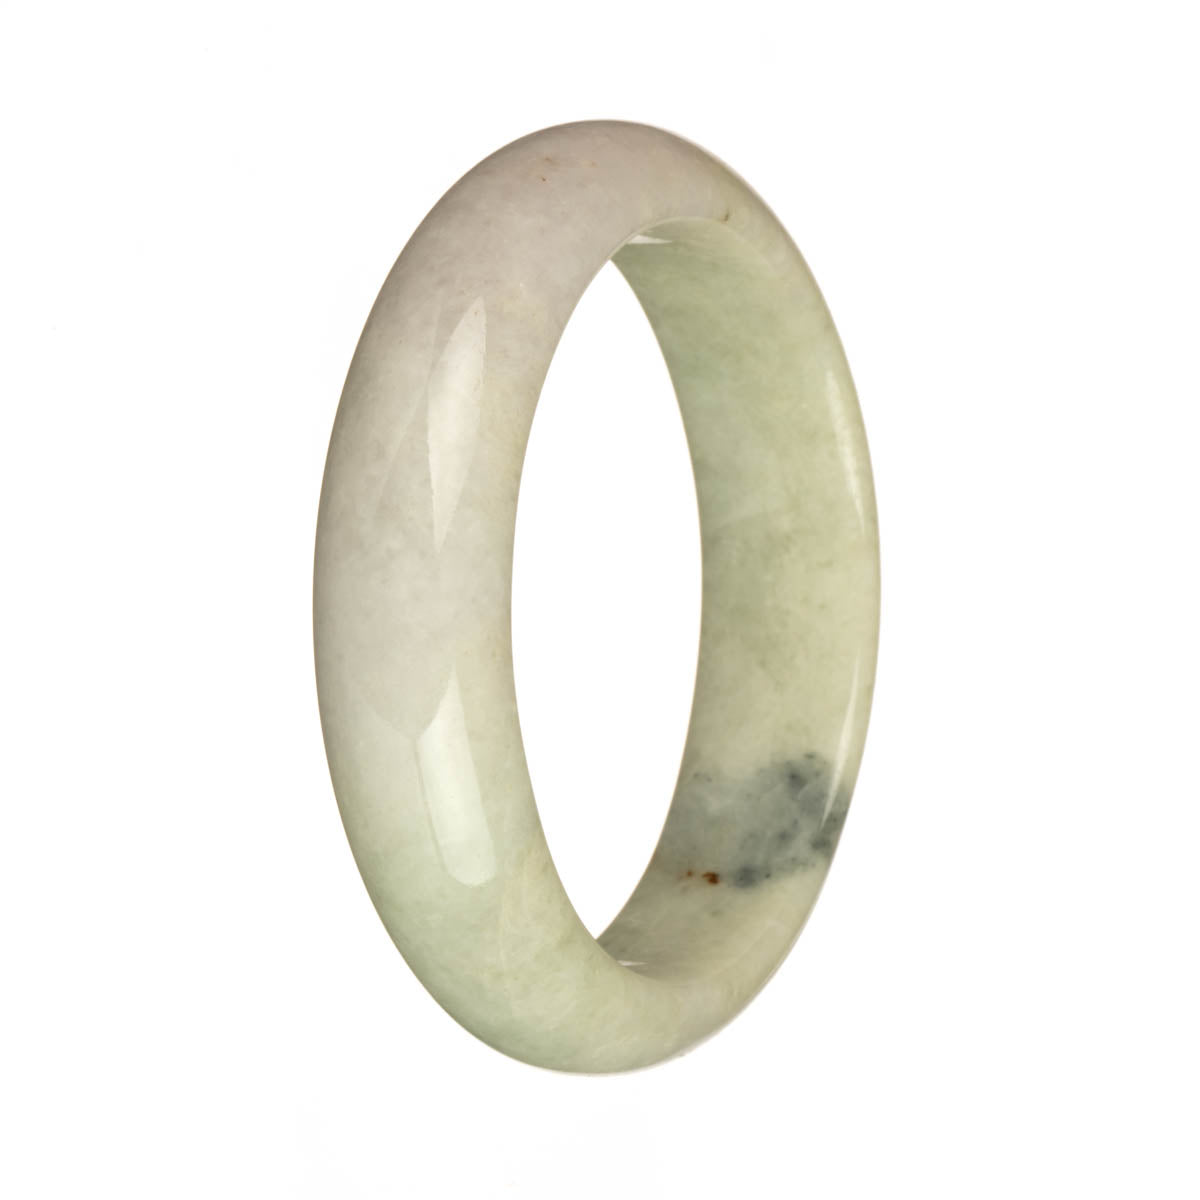 Genuine Grade A Pale Green and Pale Lavender with Deep Green Patch Traditional Jade Bangle - 58mm Half Moon